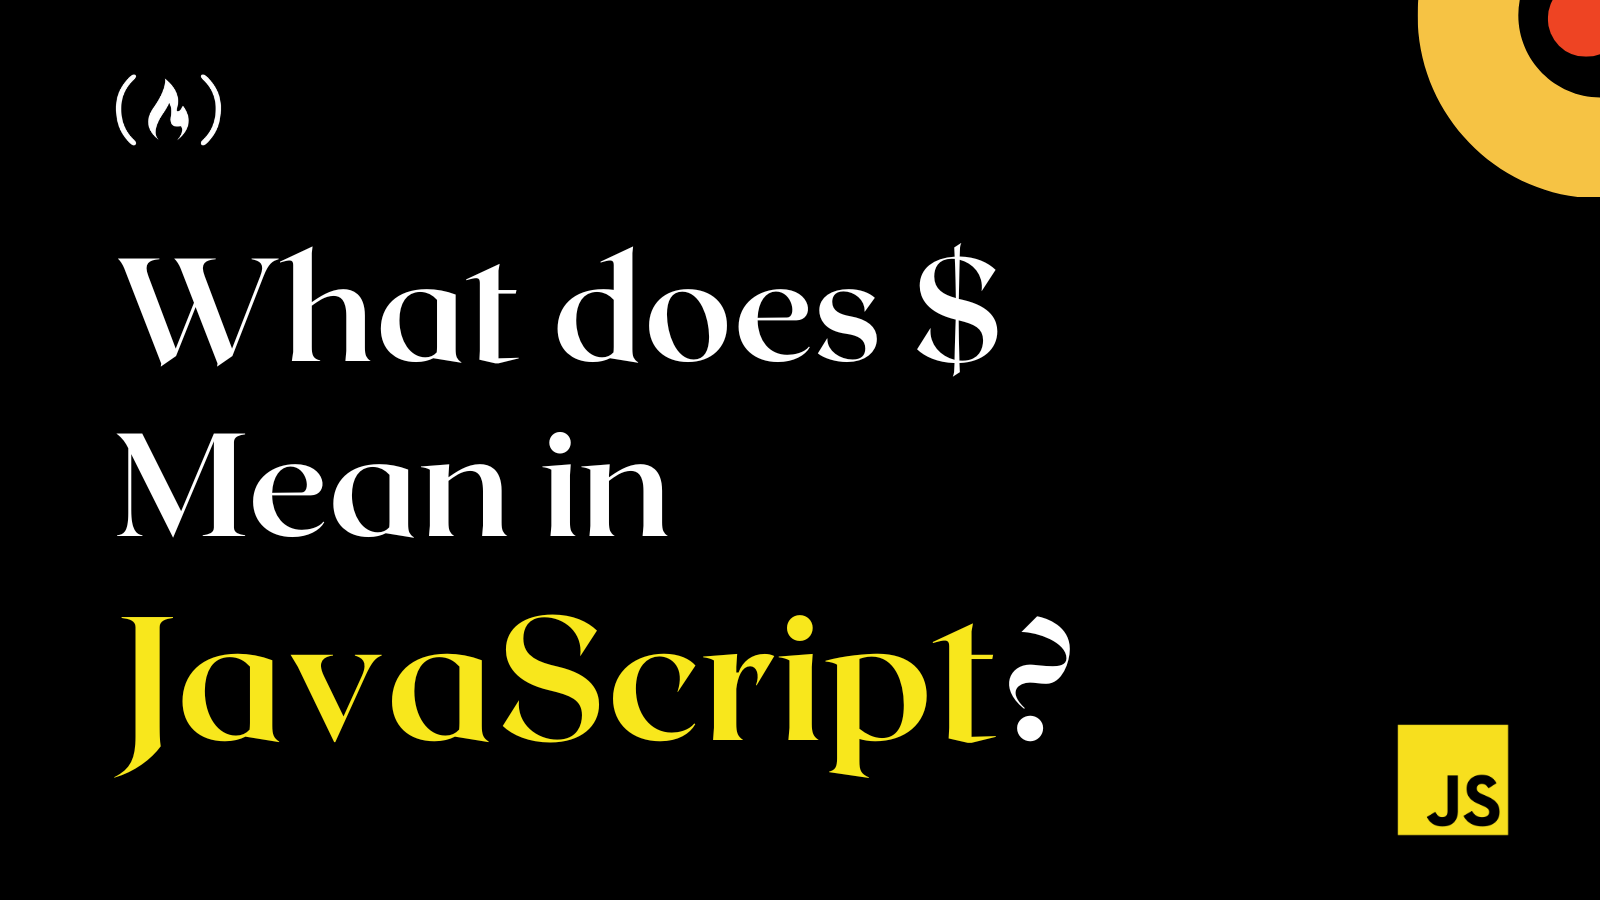 What Does $ Mean in JavaScript? Dollar Sign Operator in JS